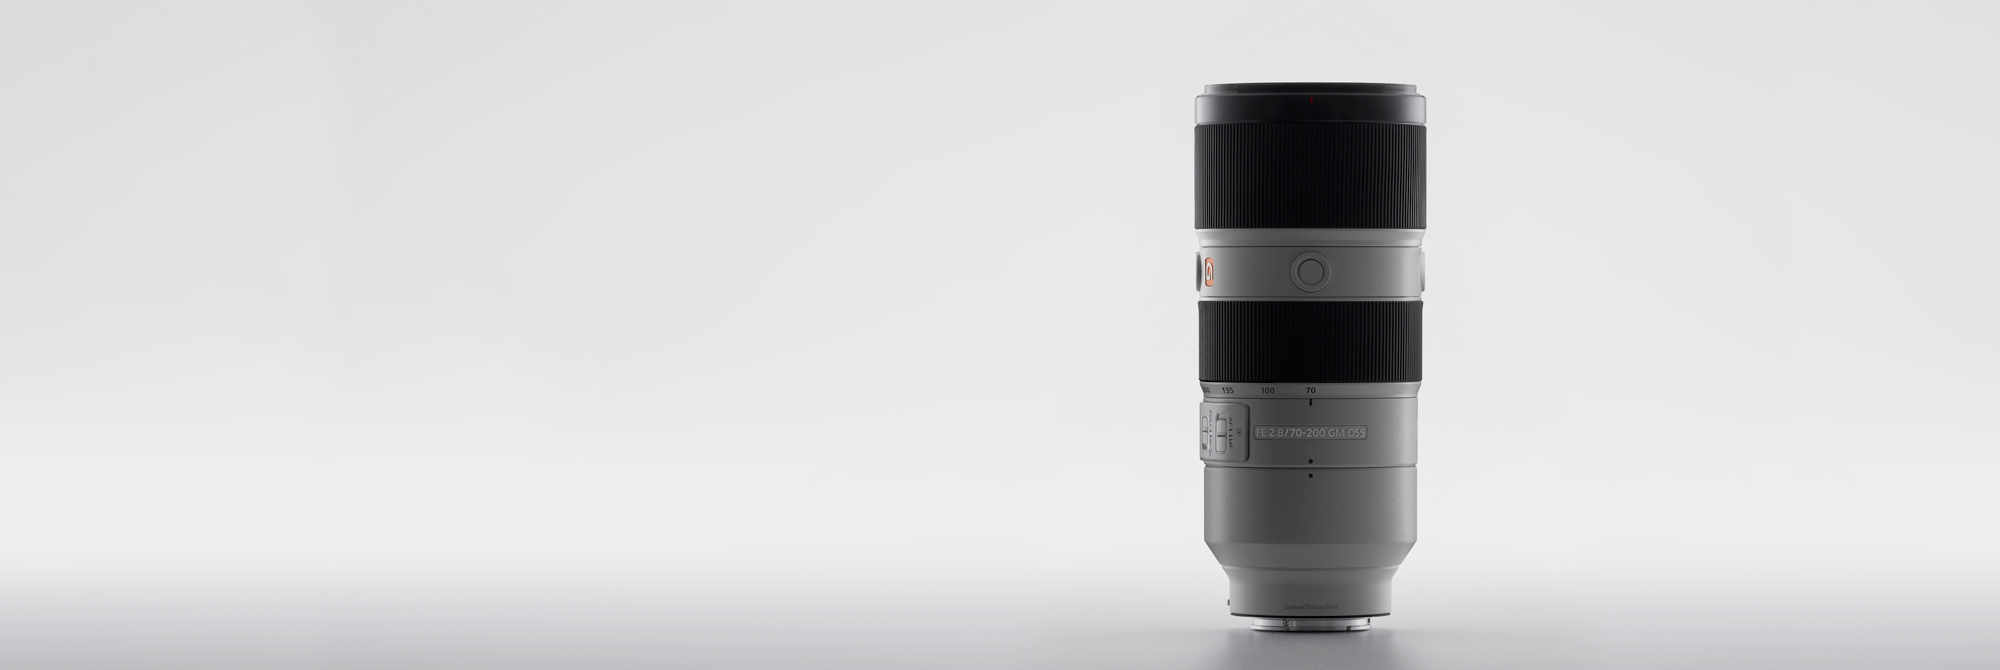 G MASTER FE 70-200mm F2.8 GM OSS Commentary of Engineers - FE 70 ...